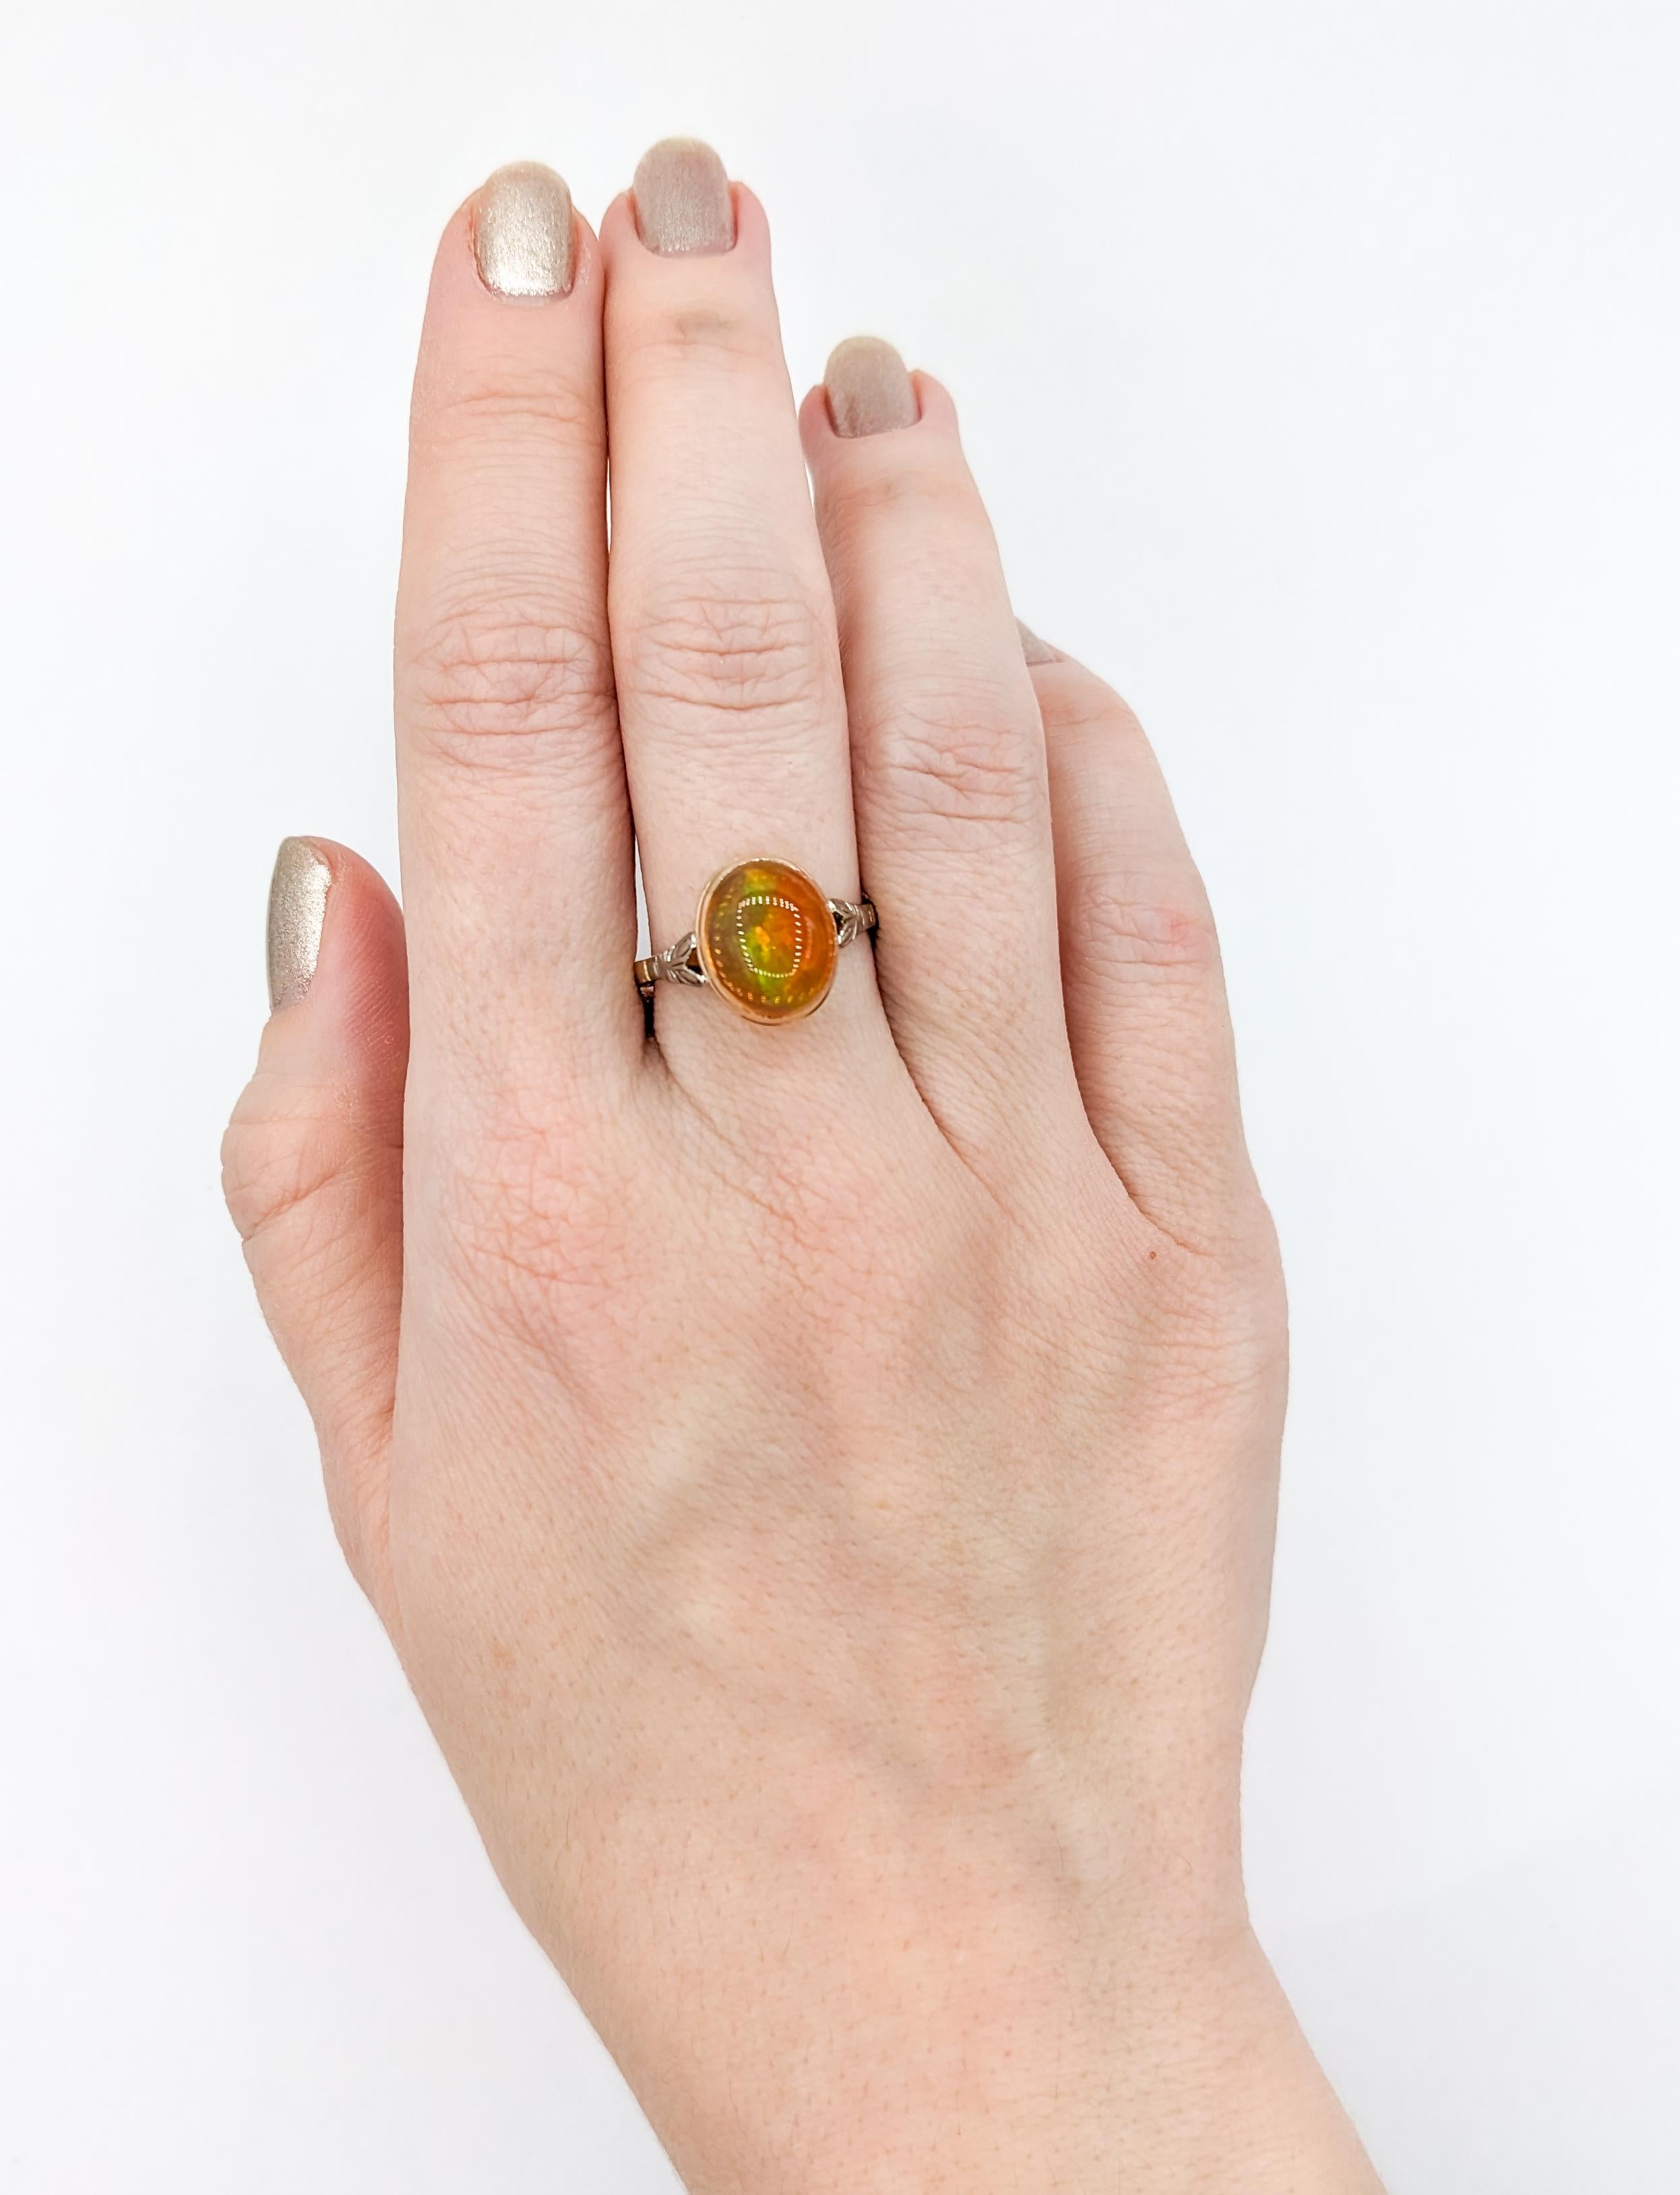 Cabochon Fire Opal Ring In Yellow Gold In Excellent Condition For Sale In Bloomington, MN